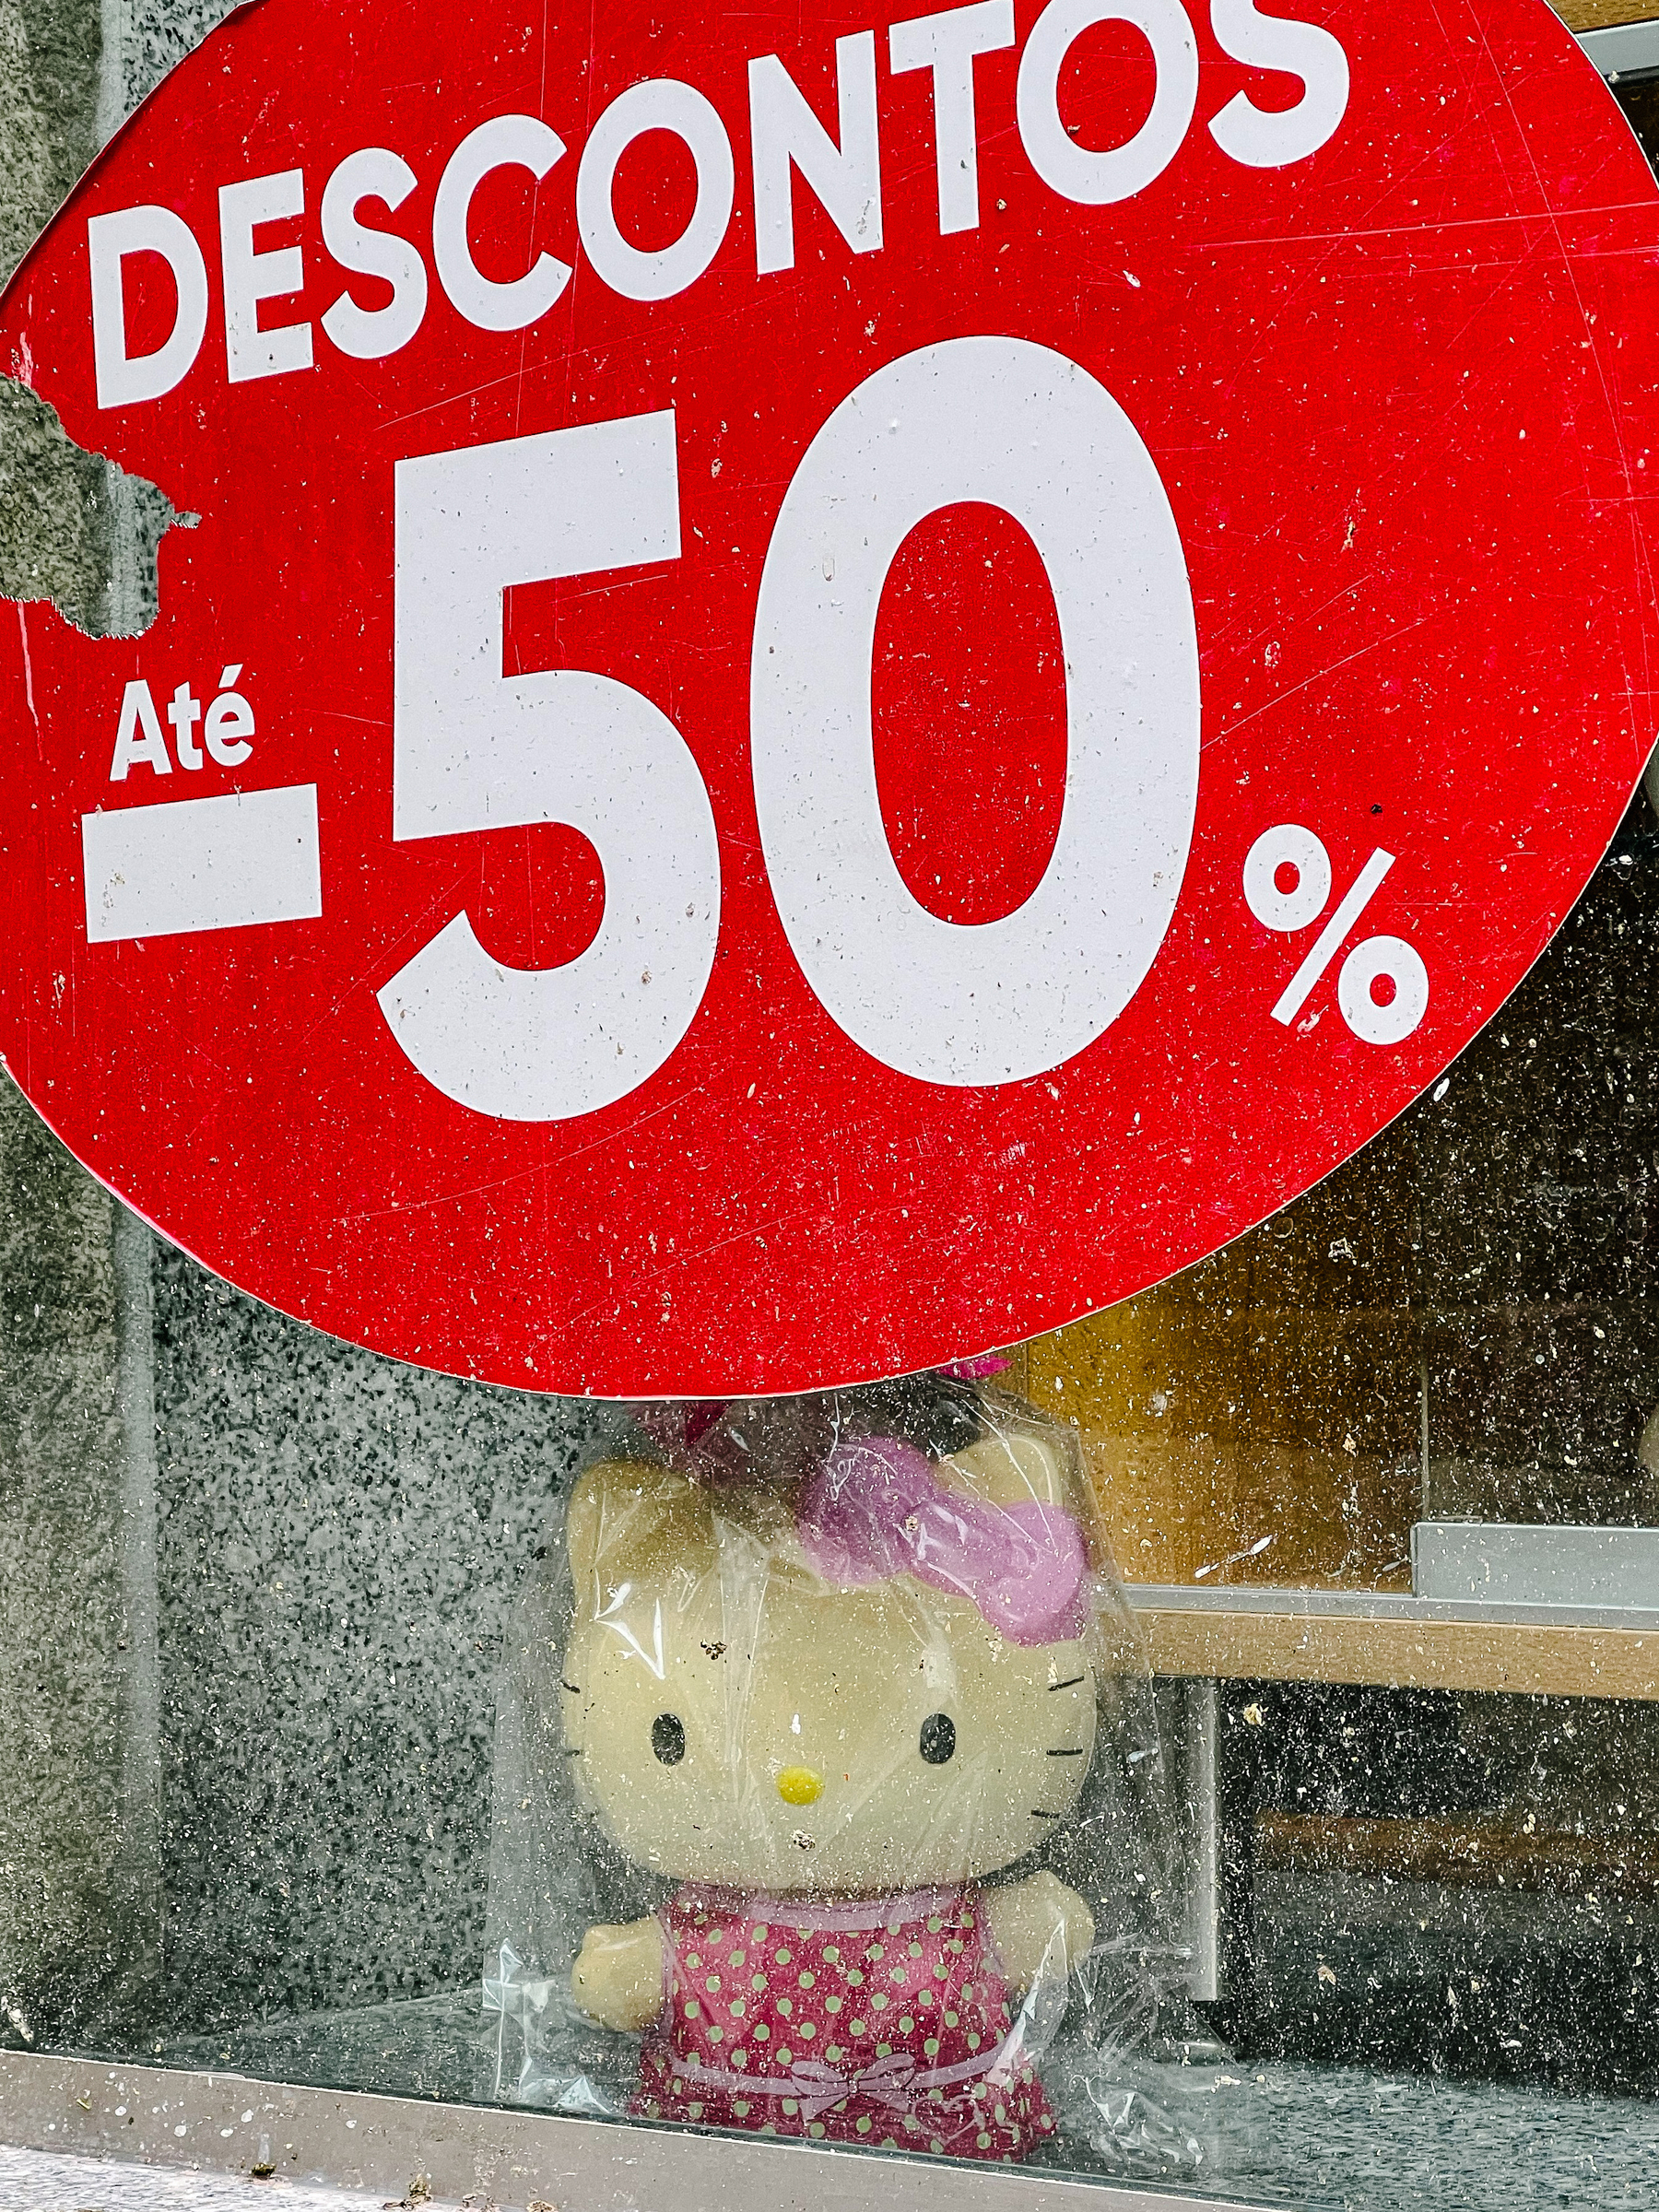 A sad looking Hello Kitty doll sits on a dirty shop window, with a big red sign advertising 50% discounts. 